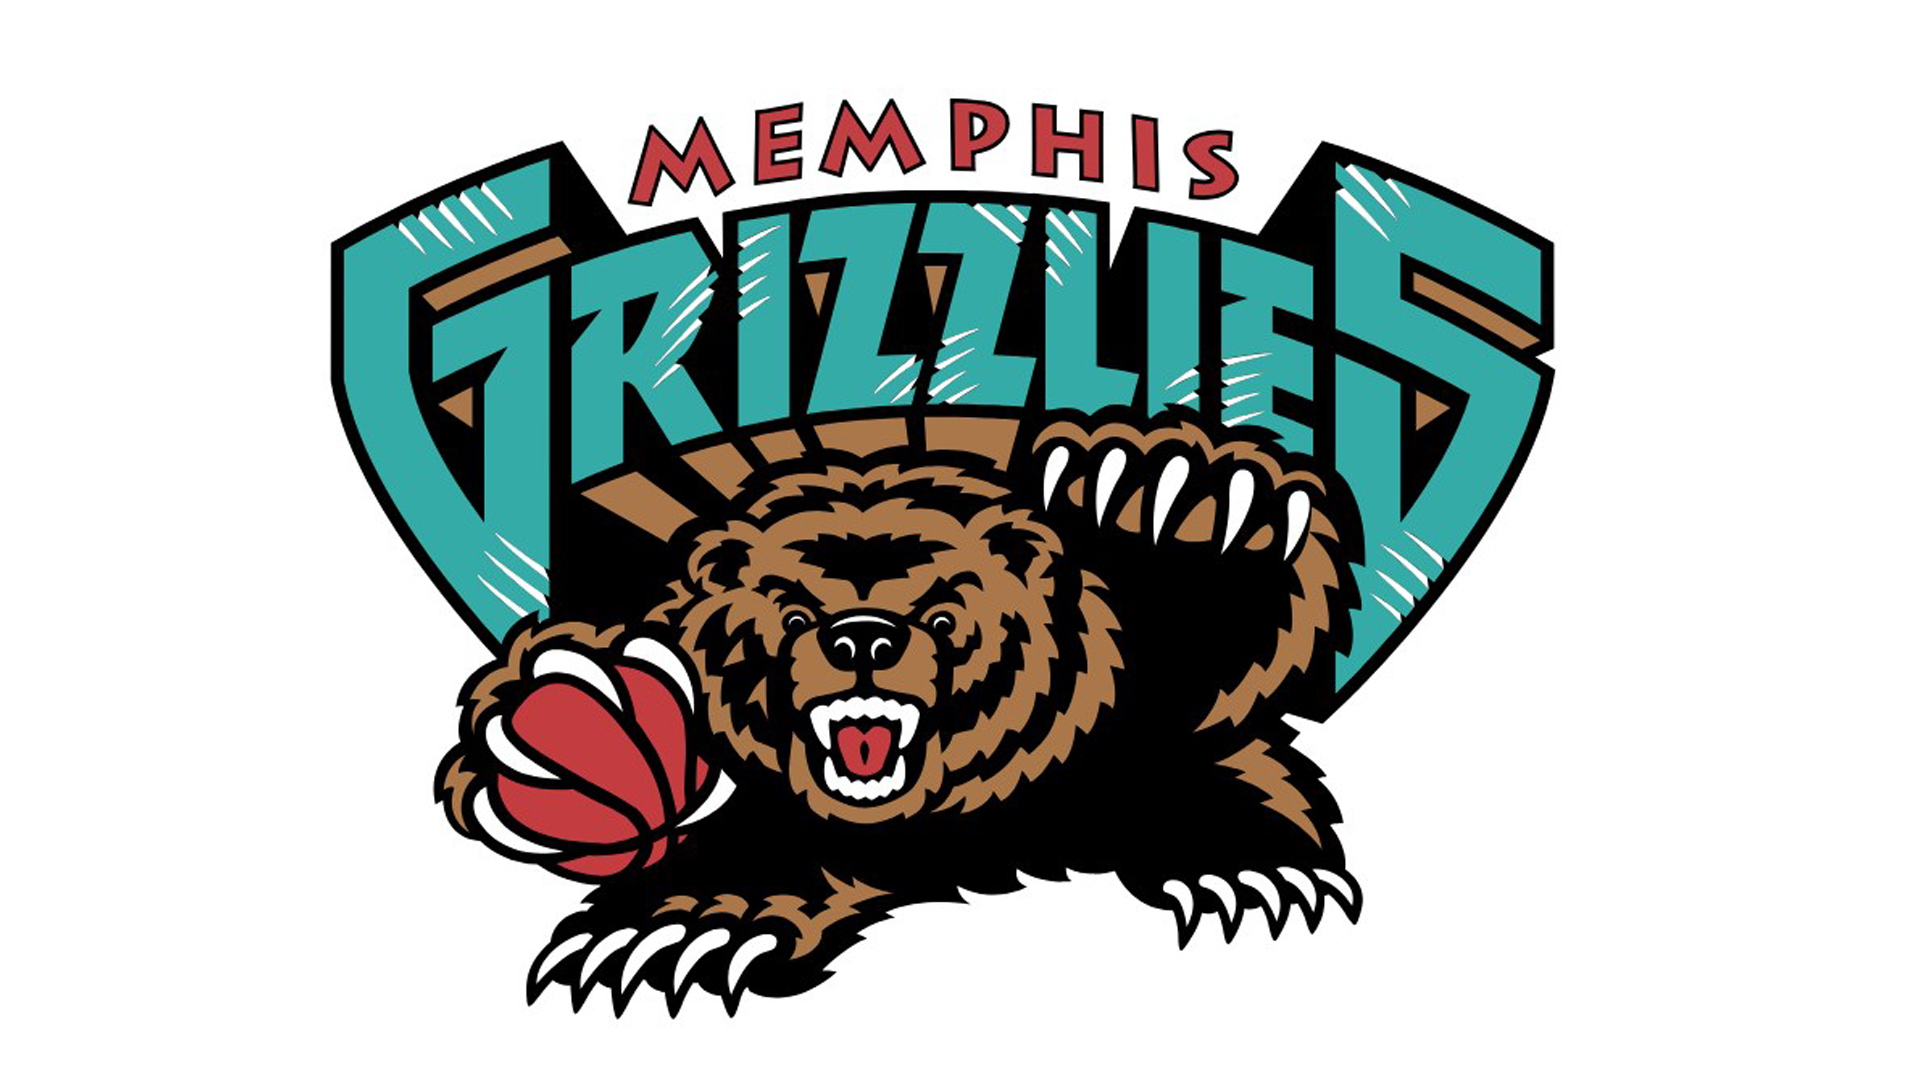 Memphis Grizzlies Logos Iron On Stickers And Peeloff  Memphis Grizzlies  Wallpaper Iphone HD Png Download  750x9306158725  PngFind